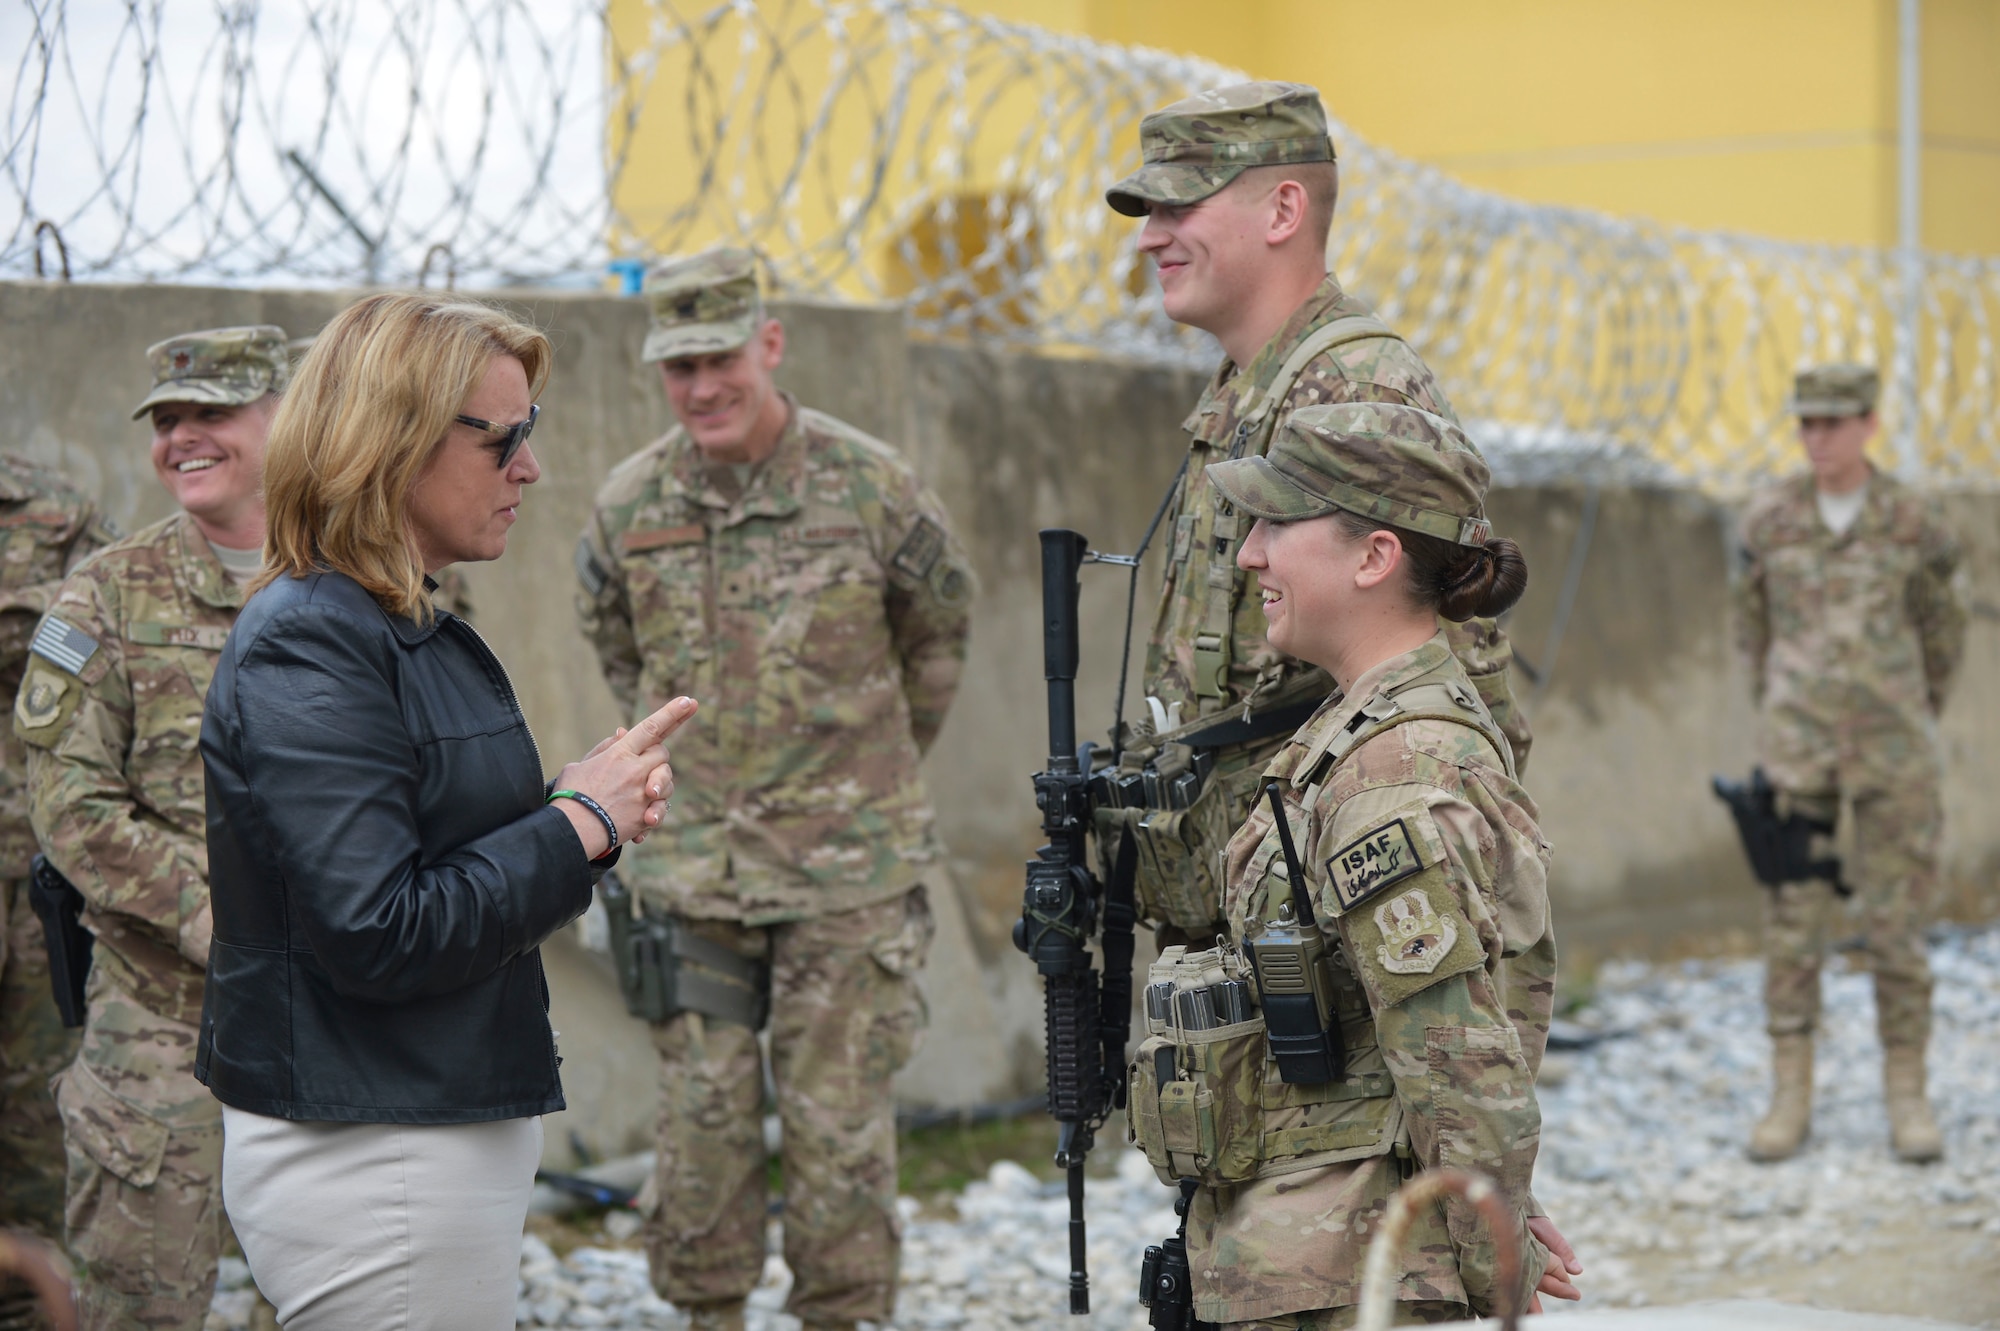 Deborah Lee James, Secretary of the Air Force, talks to Airman 1st Class Nathaniel Ripp and Airman 1st Class Kaitlyn Ramstead after receiving a post briefing from the Security Forces defenders at Bagram Airfield, Afghanistan, March 22, 2014. Ripp and Ramstead were providing security for a venue that James was speaking at during her first official visit to Afghanistan.(U.S. Air Force photo by Senior Master Sgt. Gary J. Rihn)